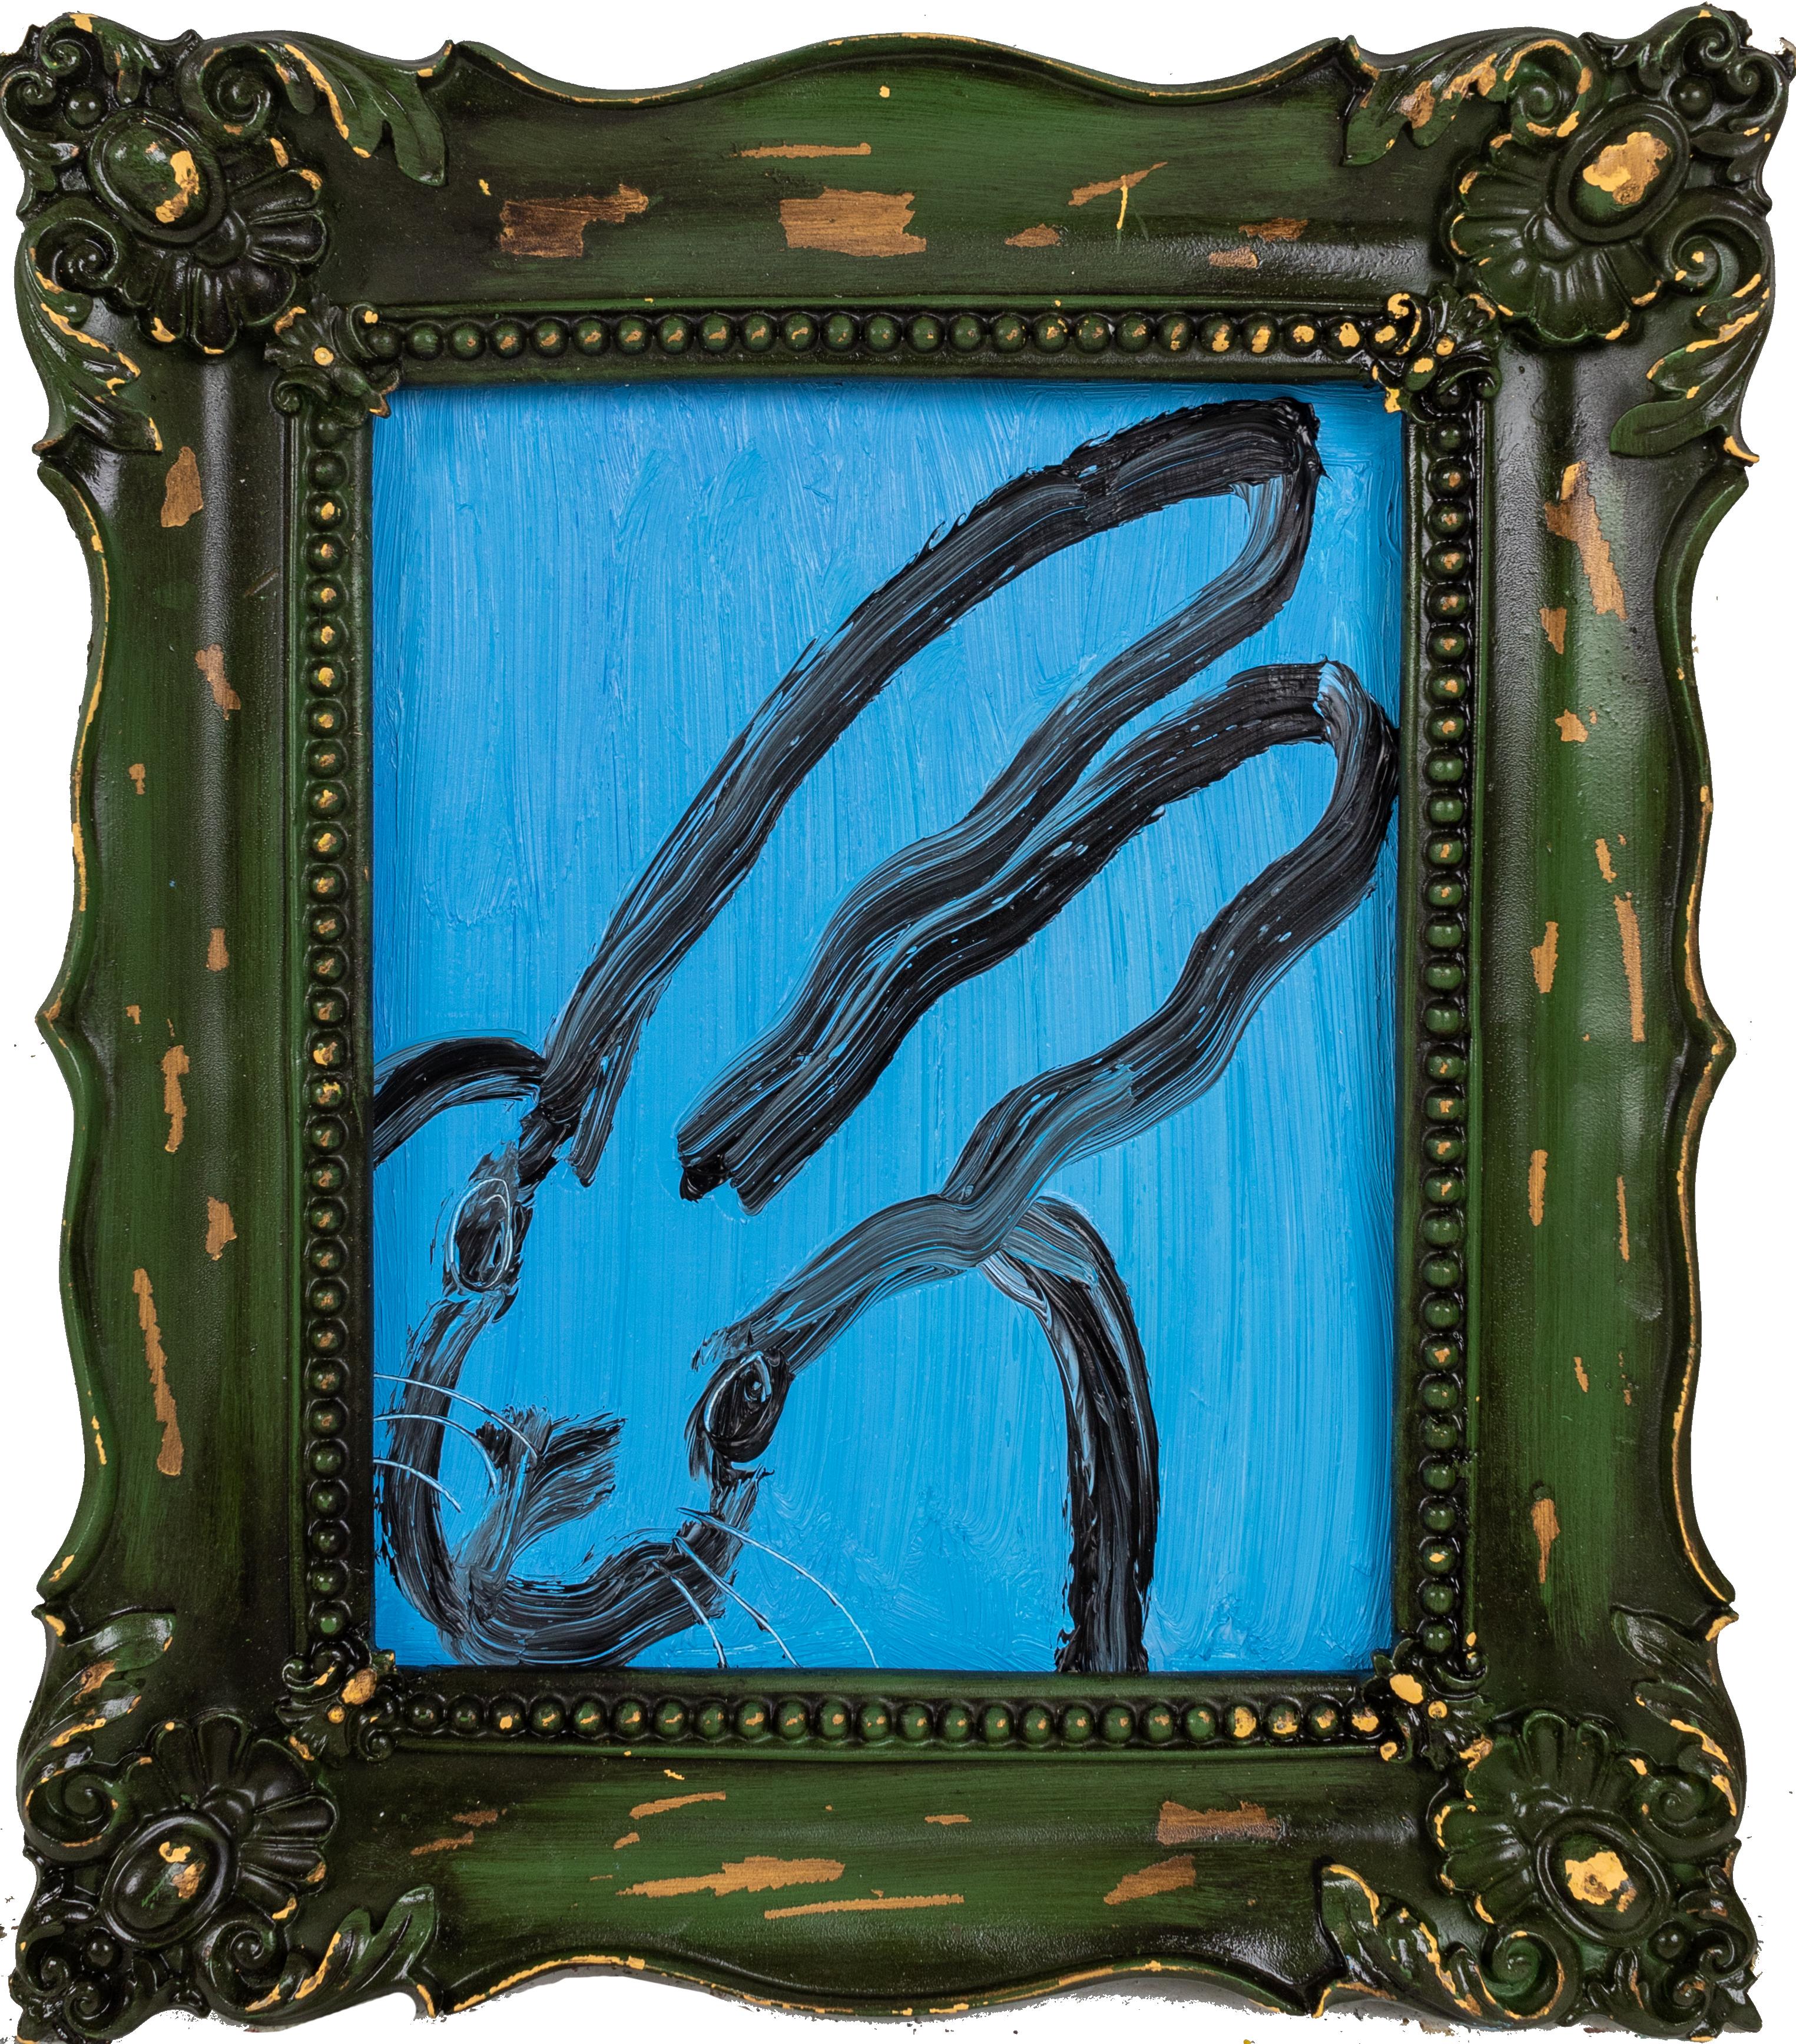 Hunt Slonem "Green Pea" Blue Bunny
Black gestured bunny on blue surface in a green vintage frame

Unframed: 10 x 8 in.
Framed: 13 x 11 in
*painting is framed*

Hunt Slonem is a well-renowned American artist is known for his neo-expressionist